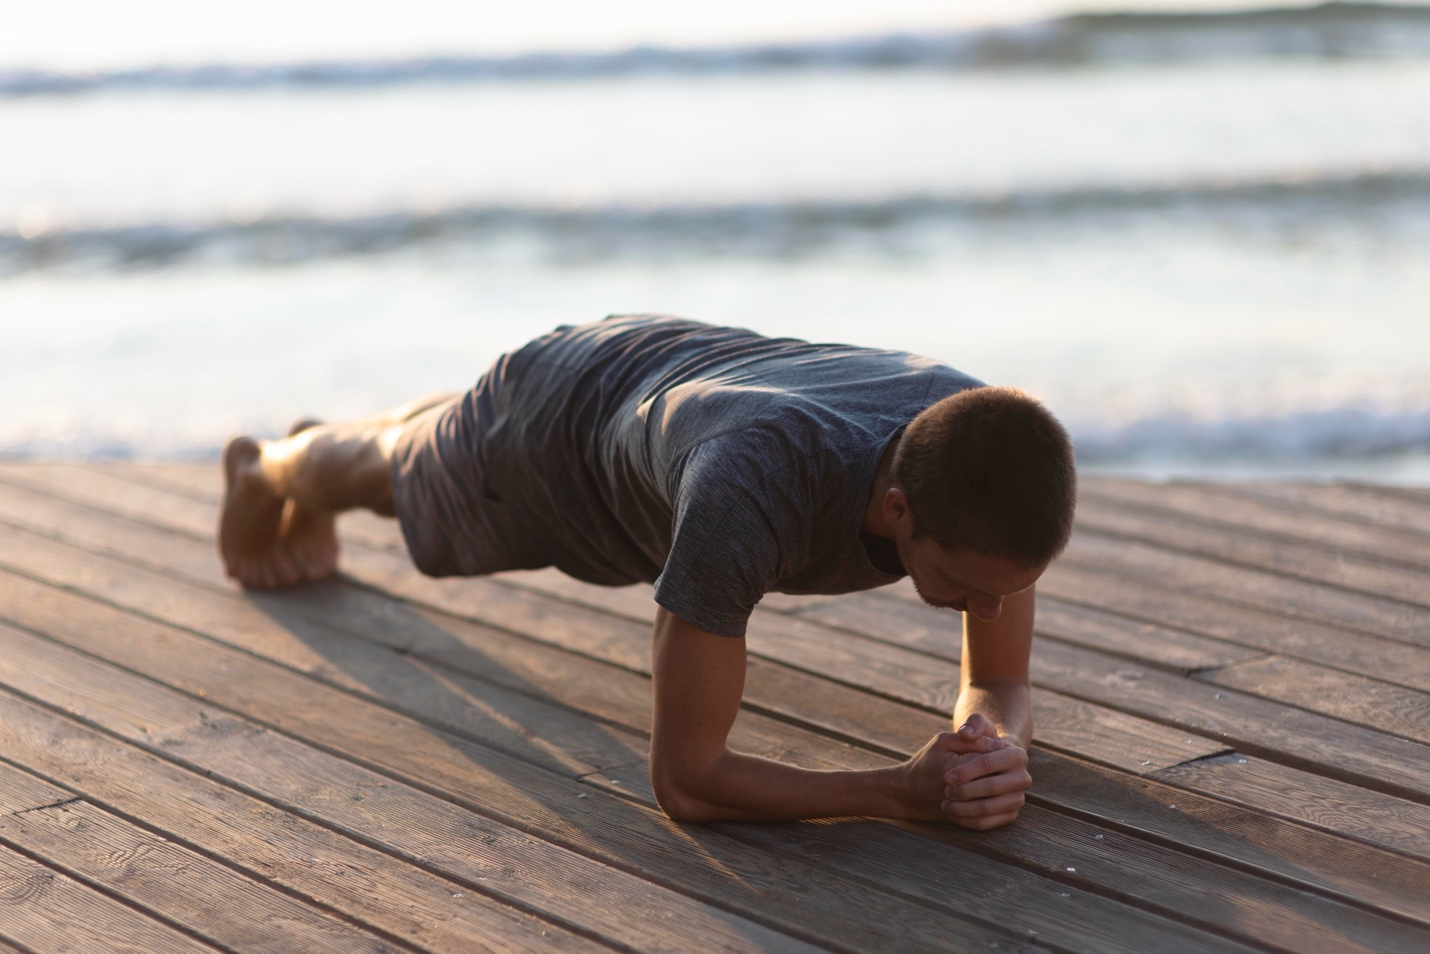 A man does plank exercise on a dock.